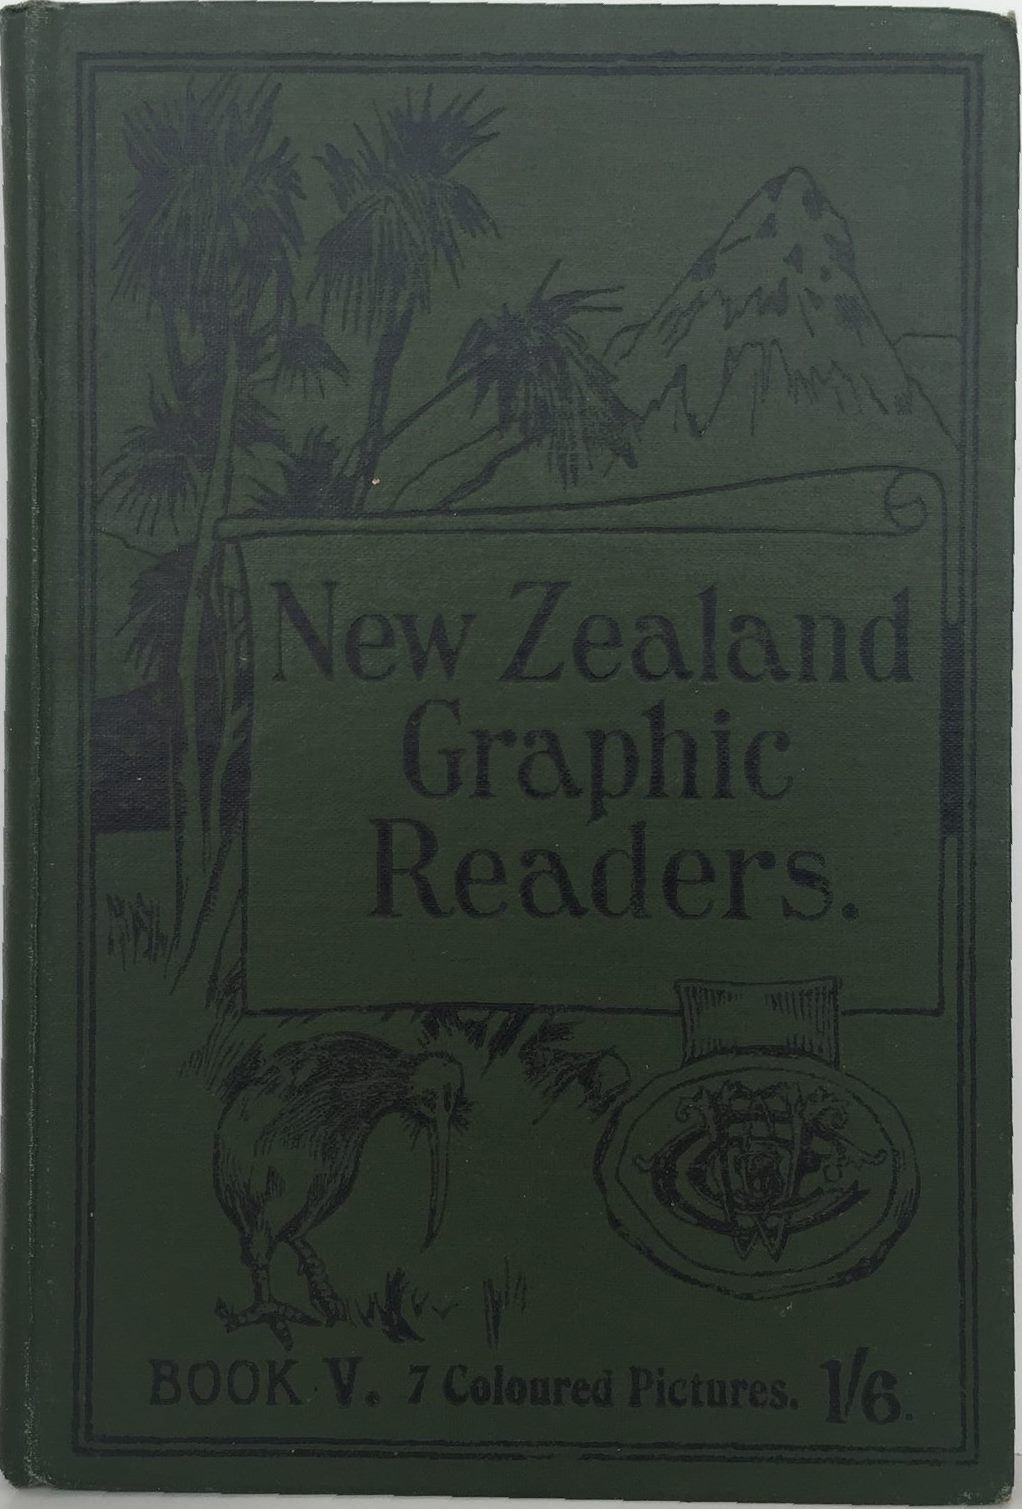 THE NEW ZEALAND GRAPHIC READERS: Fifth Book